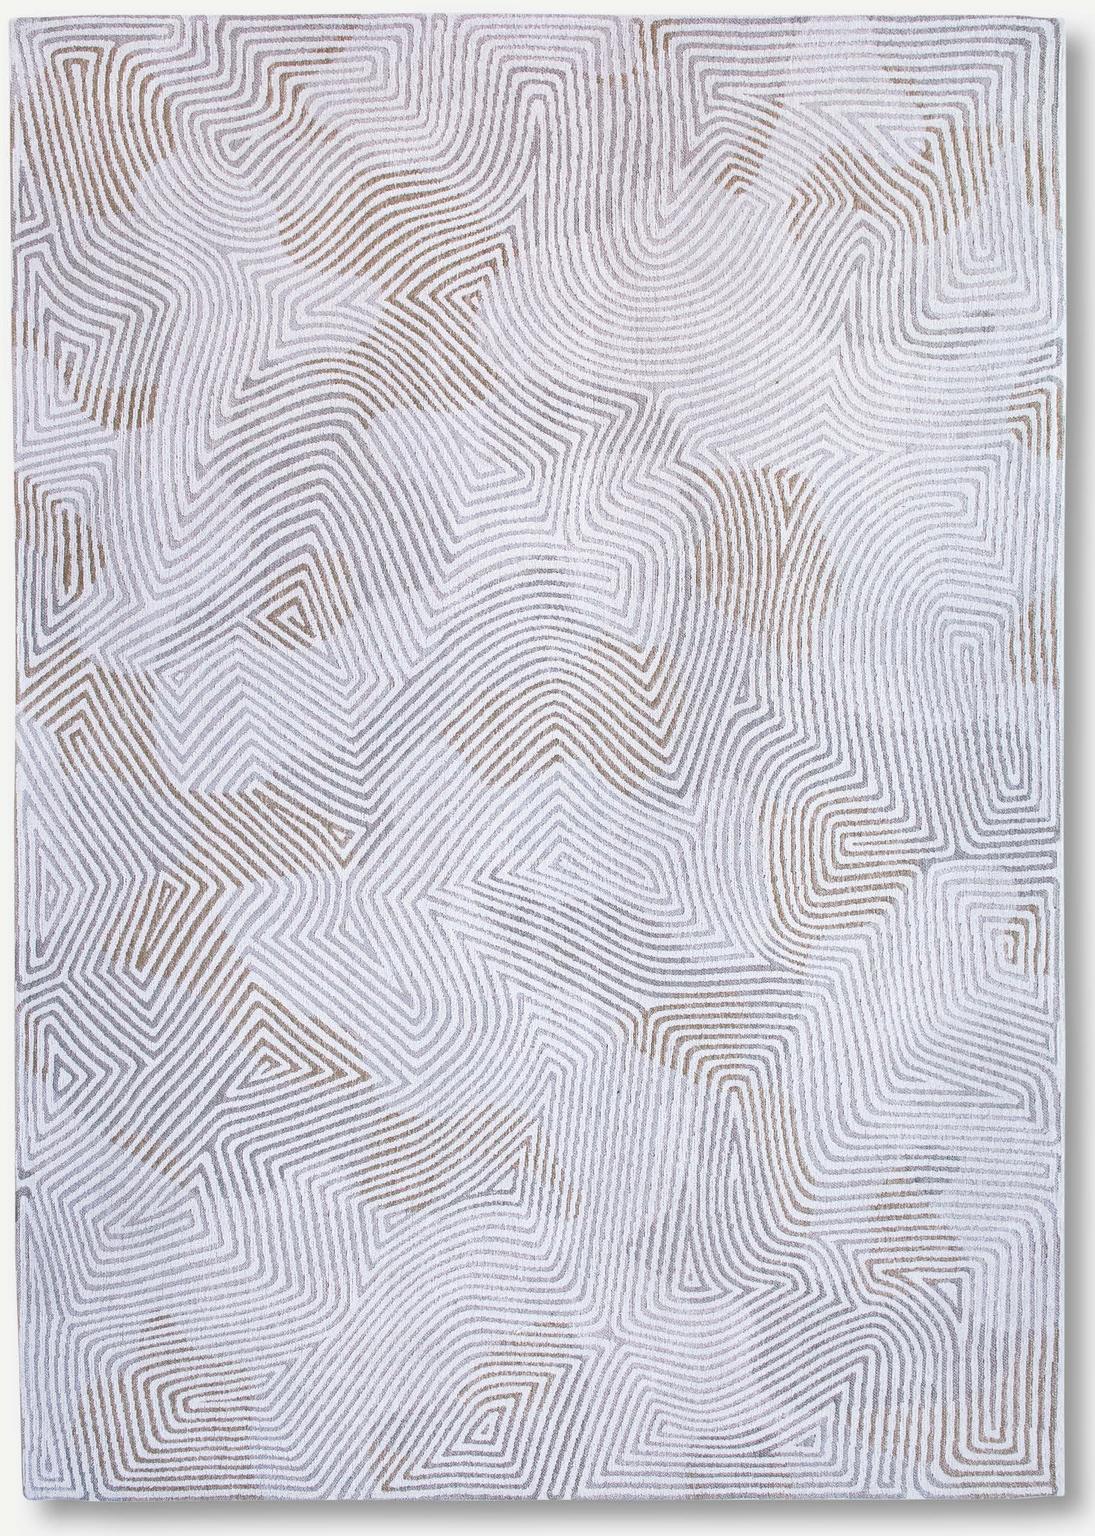 White Flatwoven Rug ☞ Size: 8' x 11' 2" (240 x 340 cm)